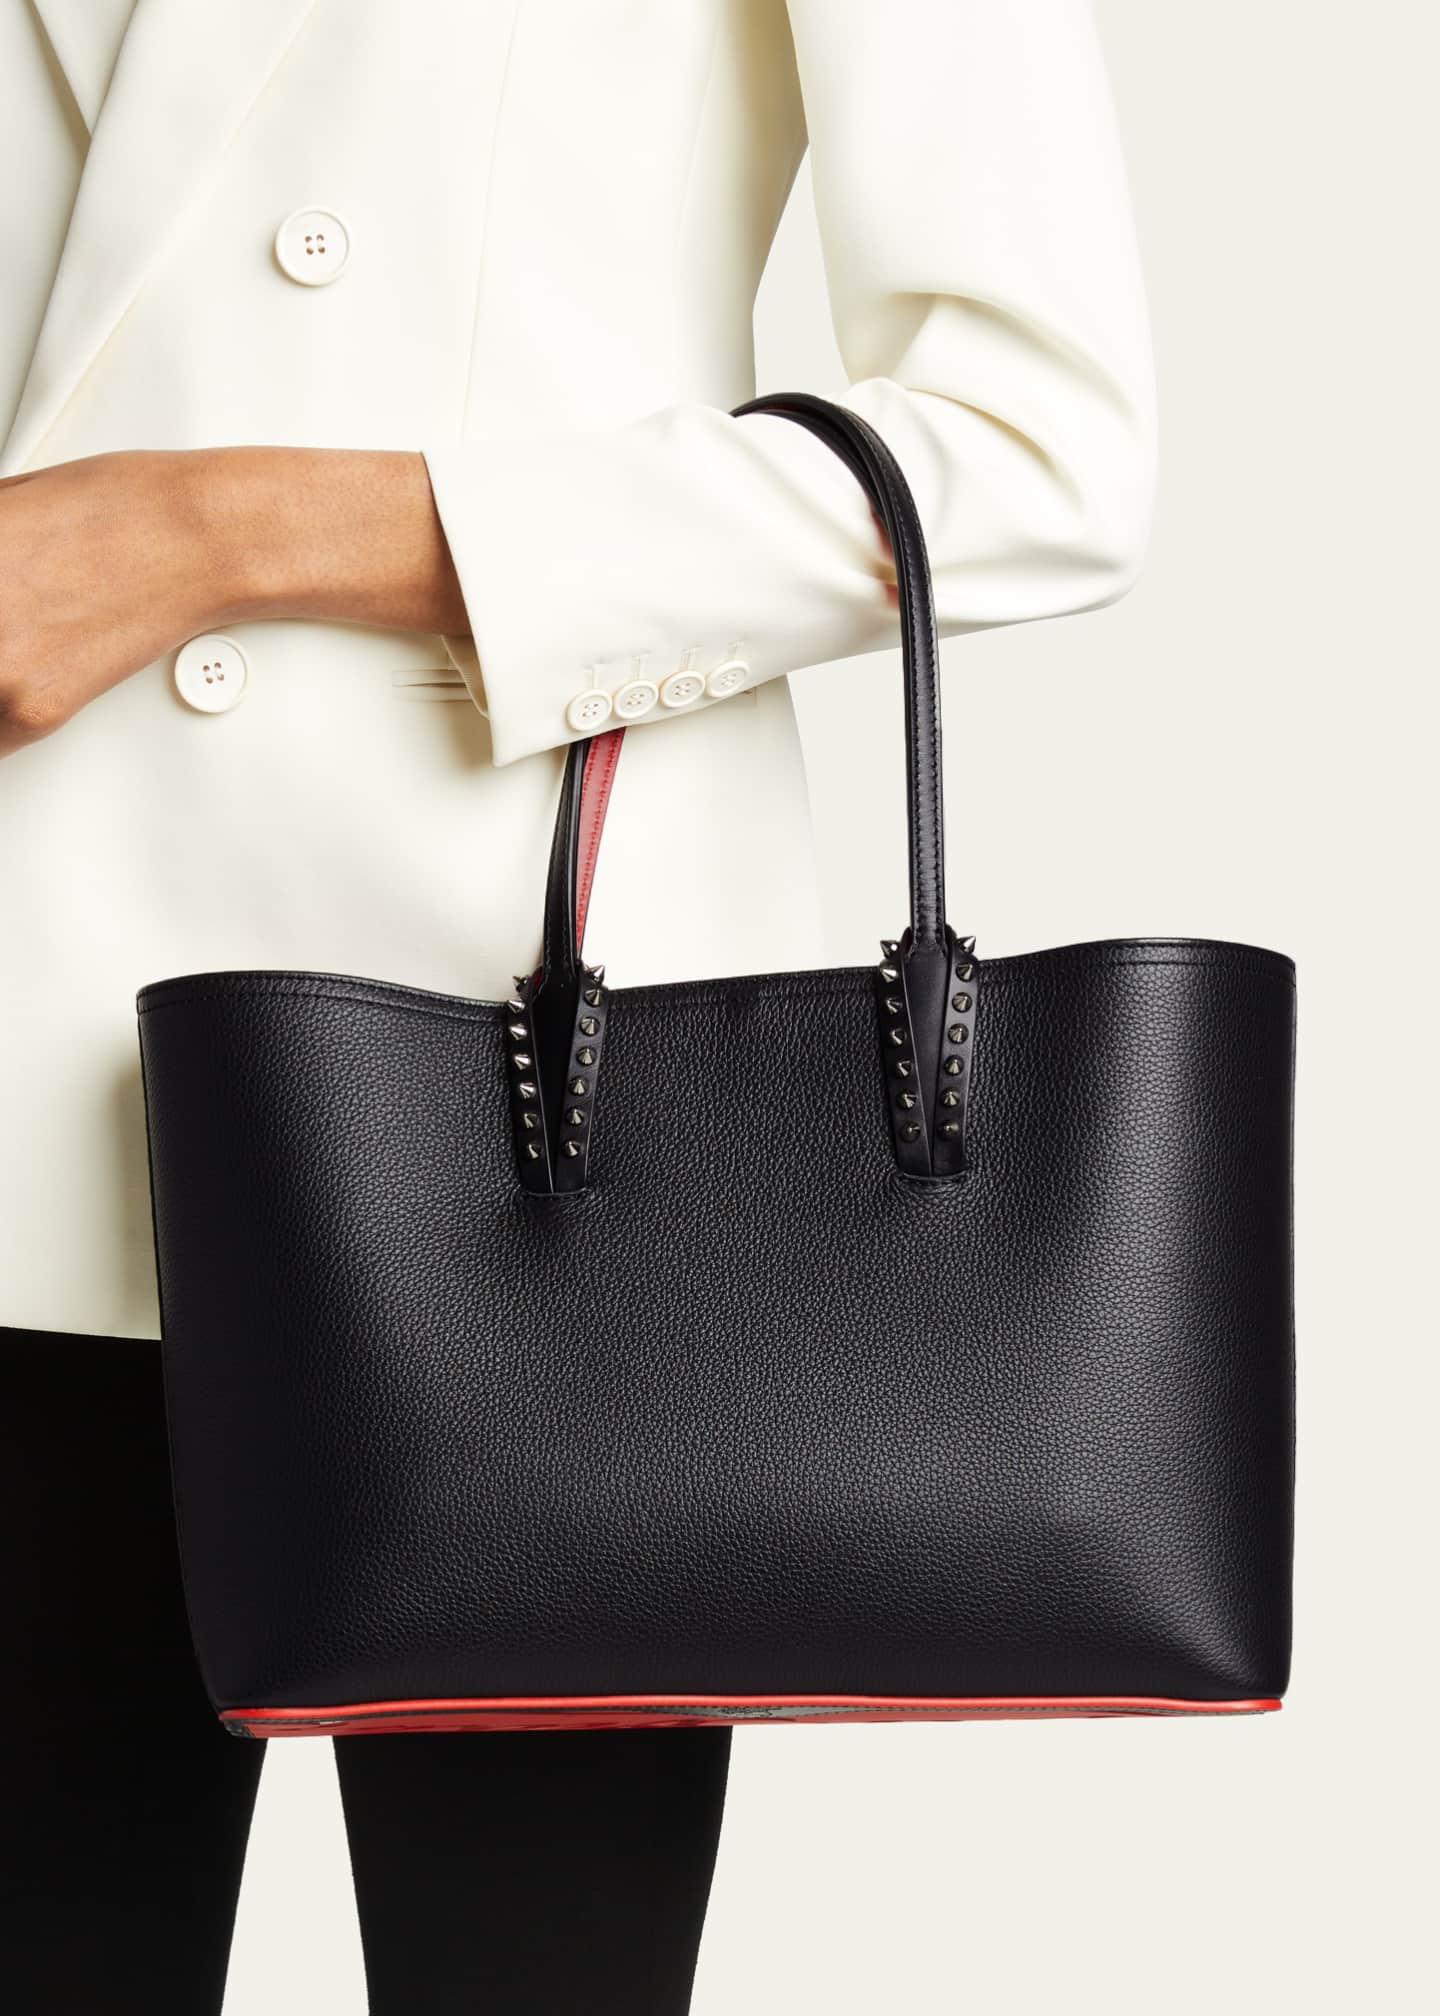 Christian Louboutin Cabata Small Tote in Grained Leather - Bergdorf Goodman